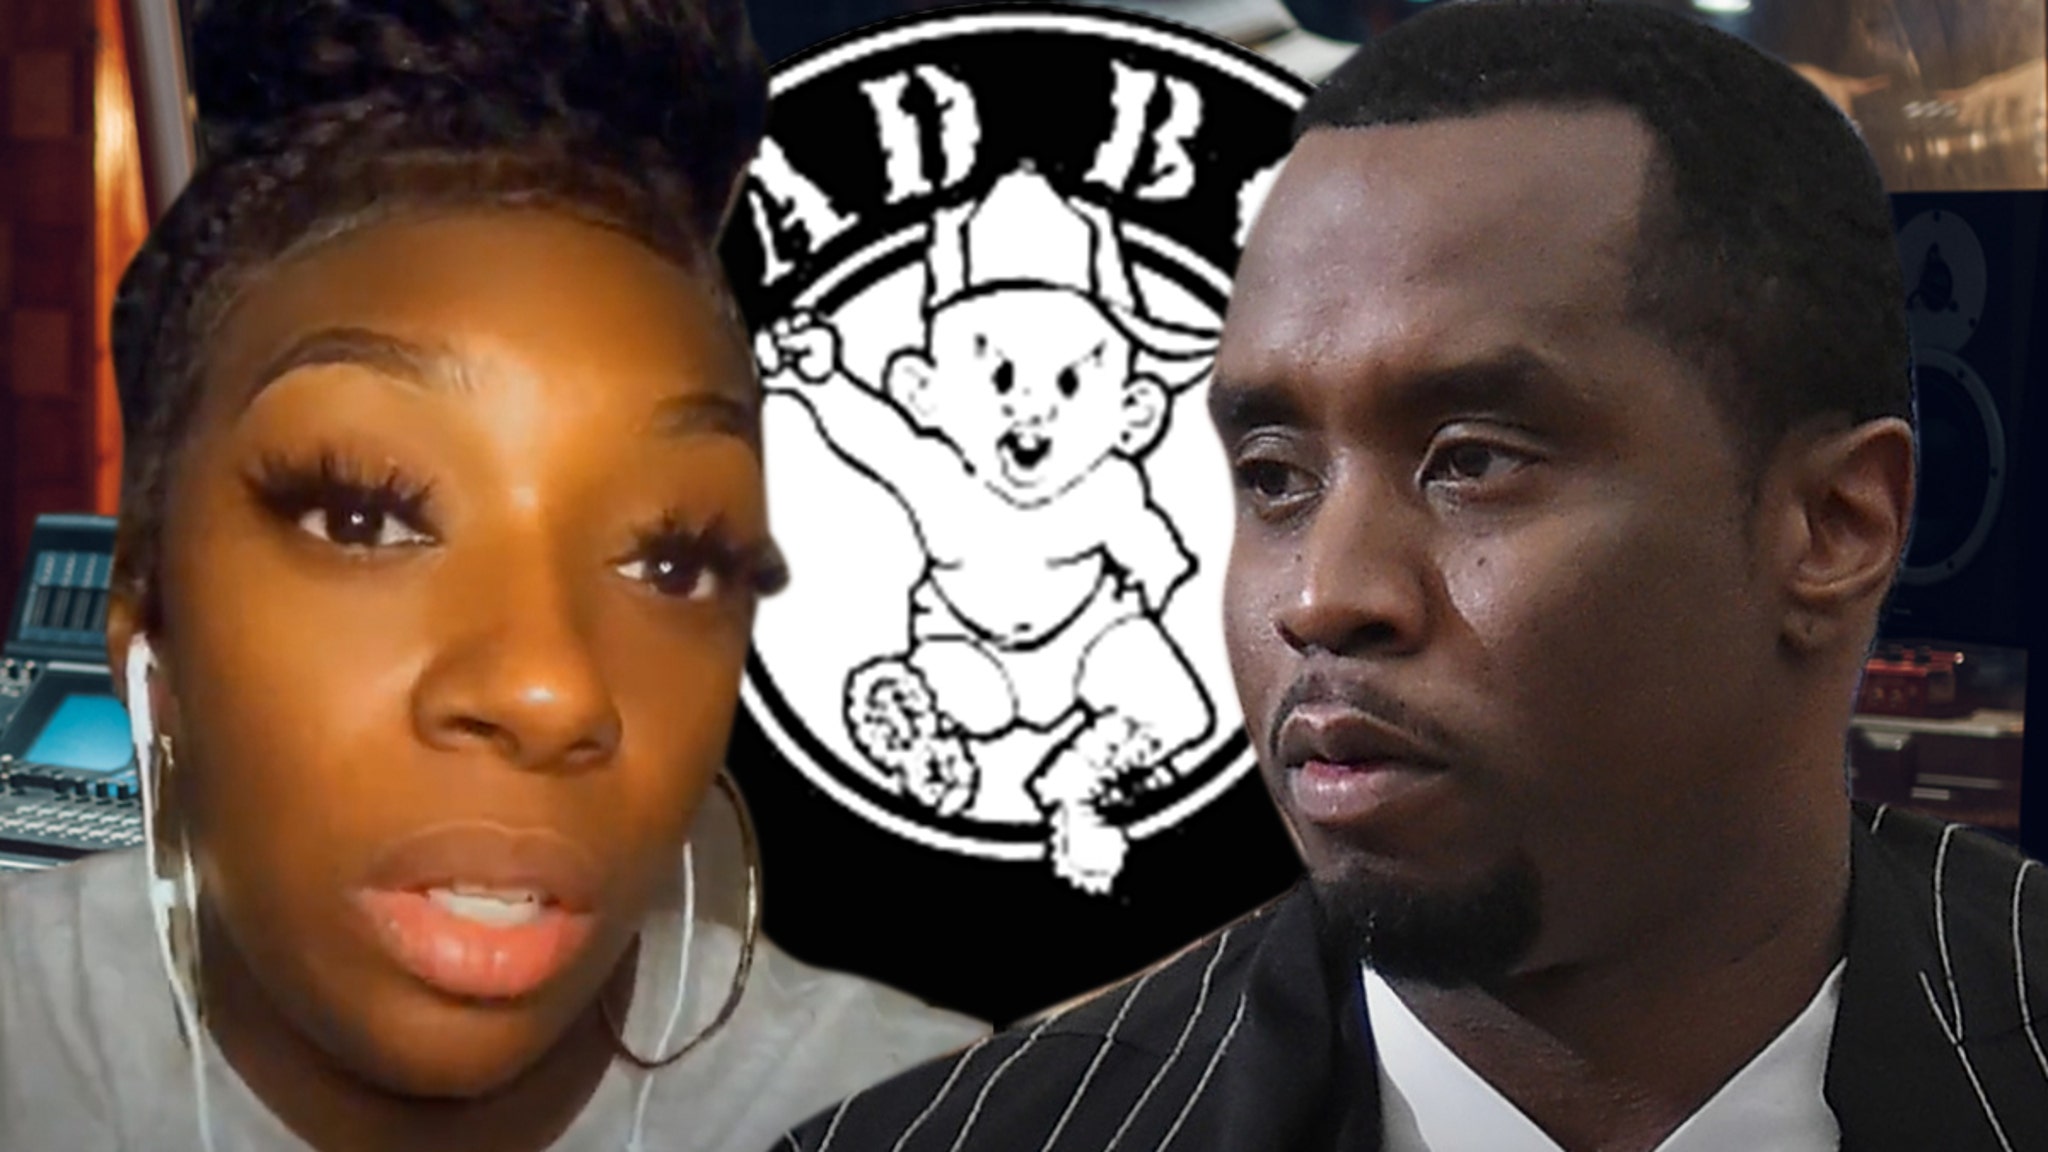 Diddy-Dirty Money Singer Says Failed Bad Boy Artists Are Disgruntled Employees